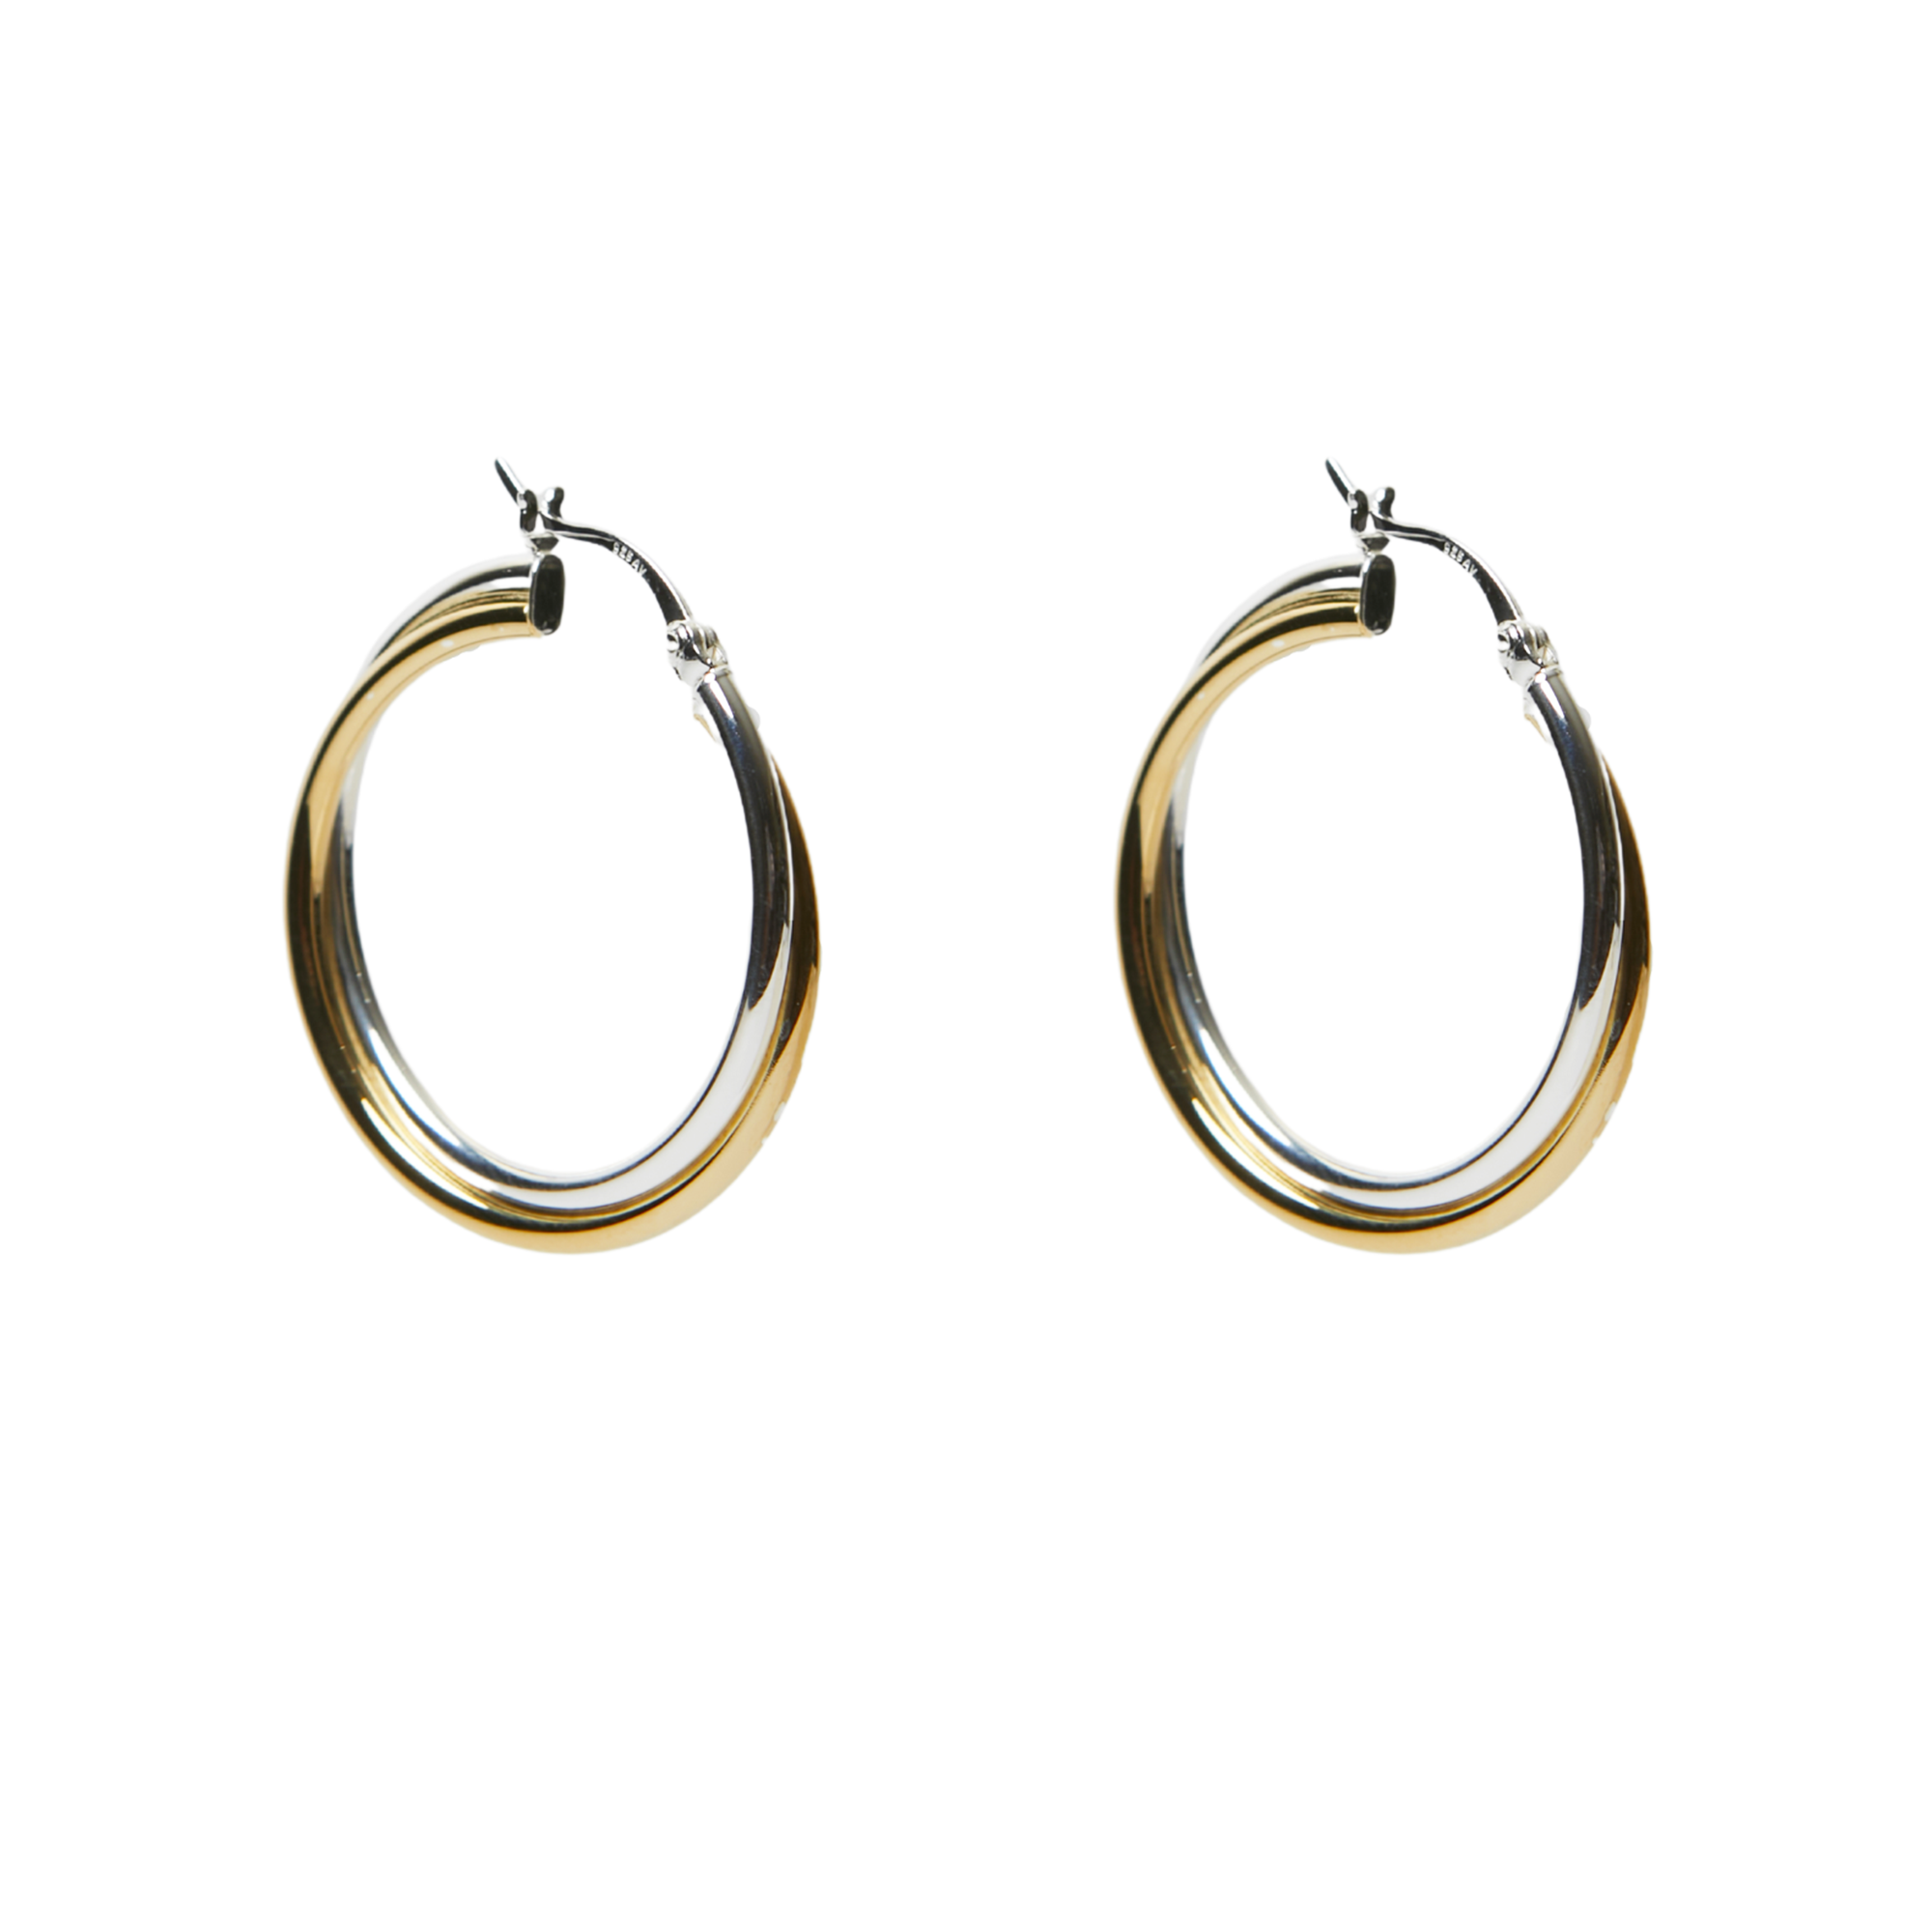 THE DOUBLE TWISTED TWO TONE HOOP